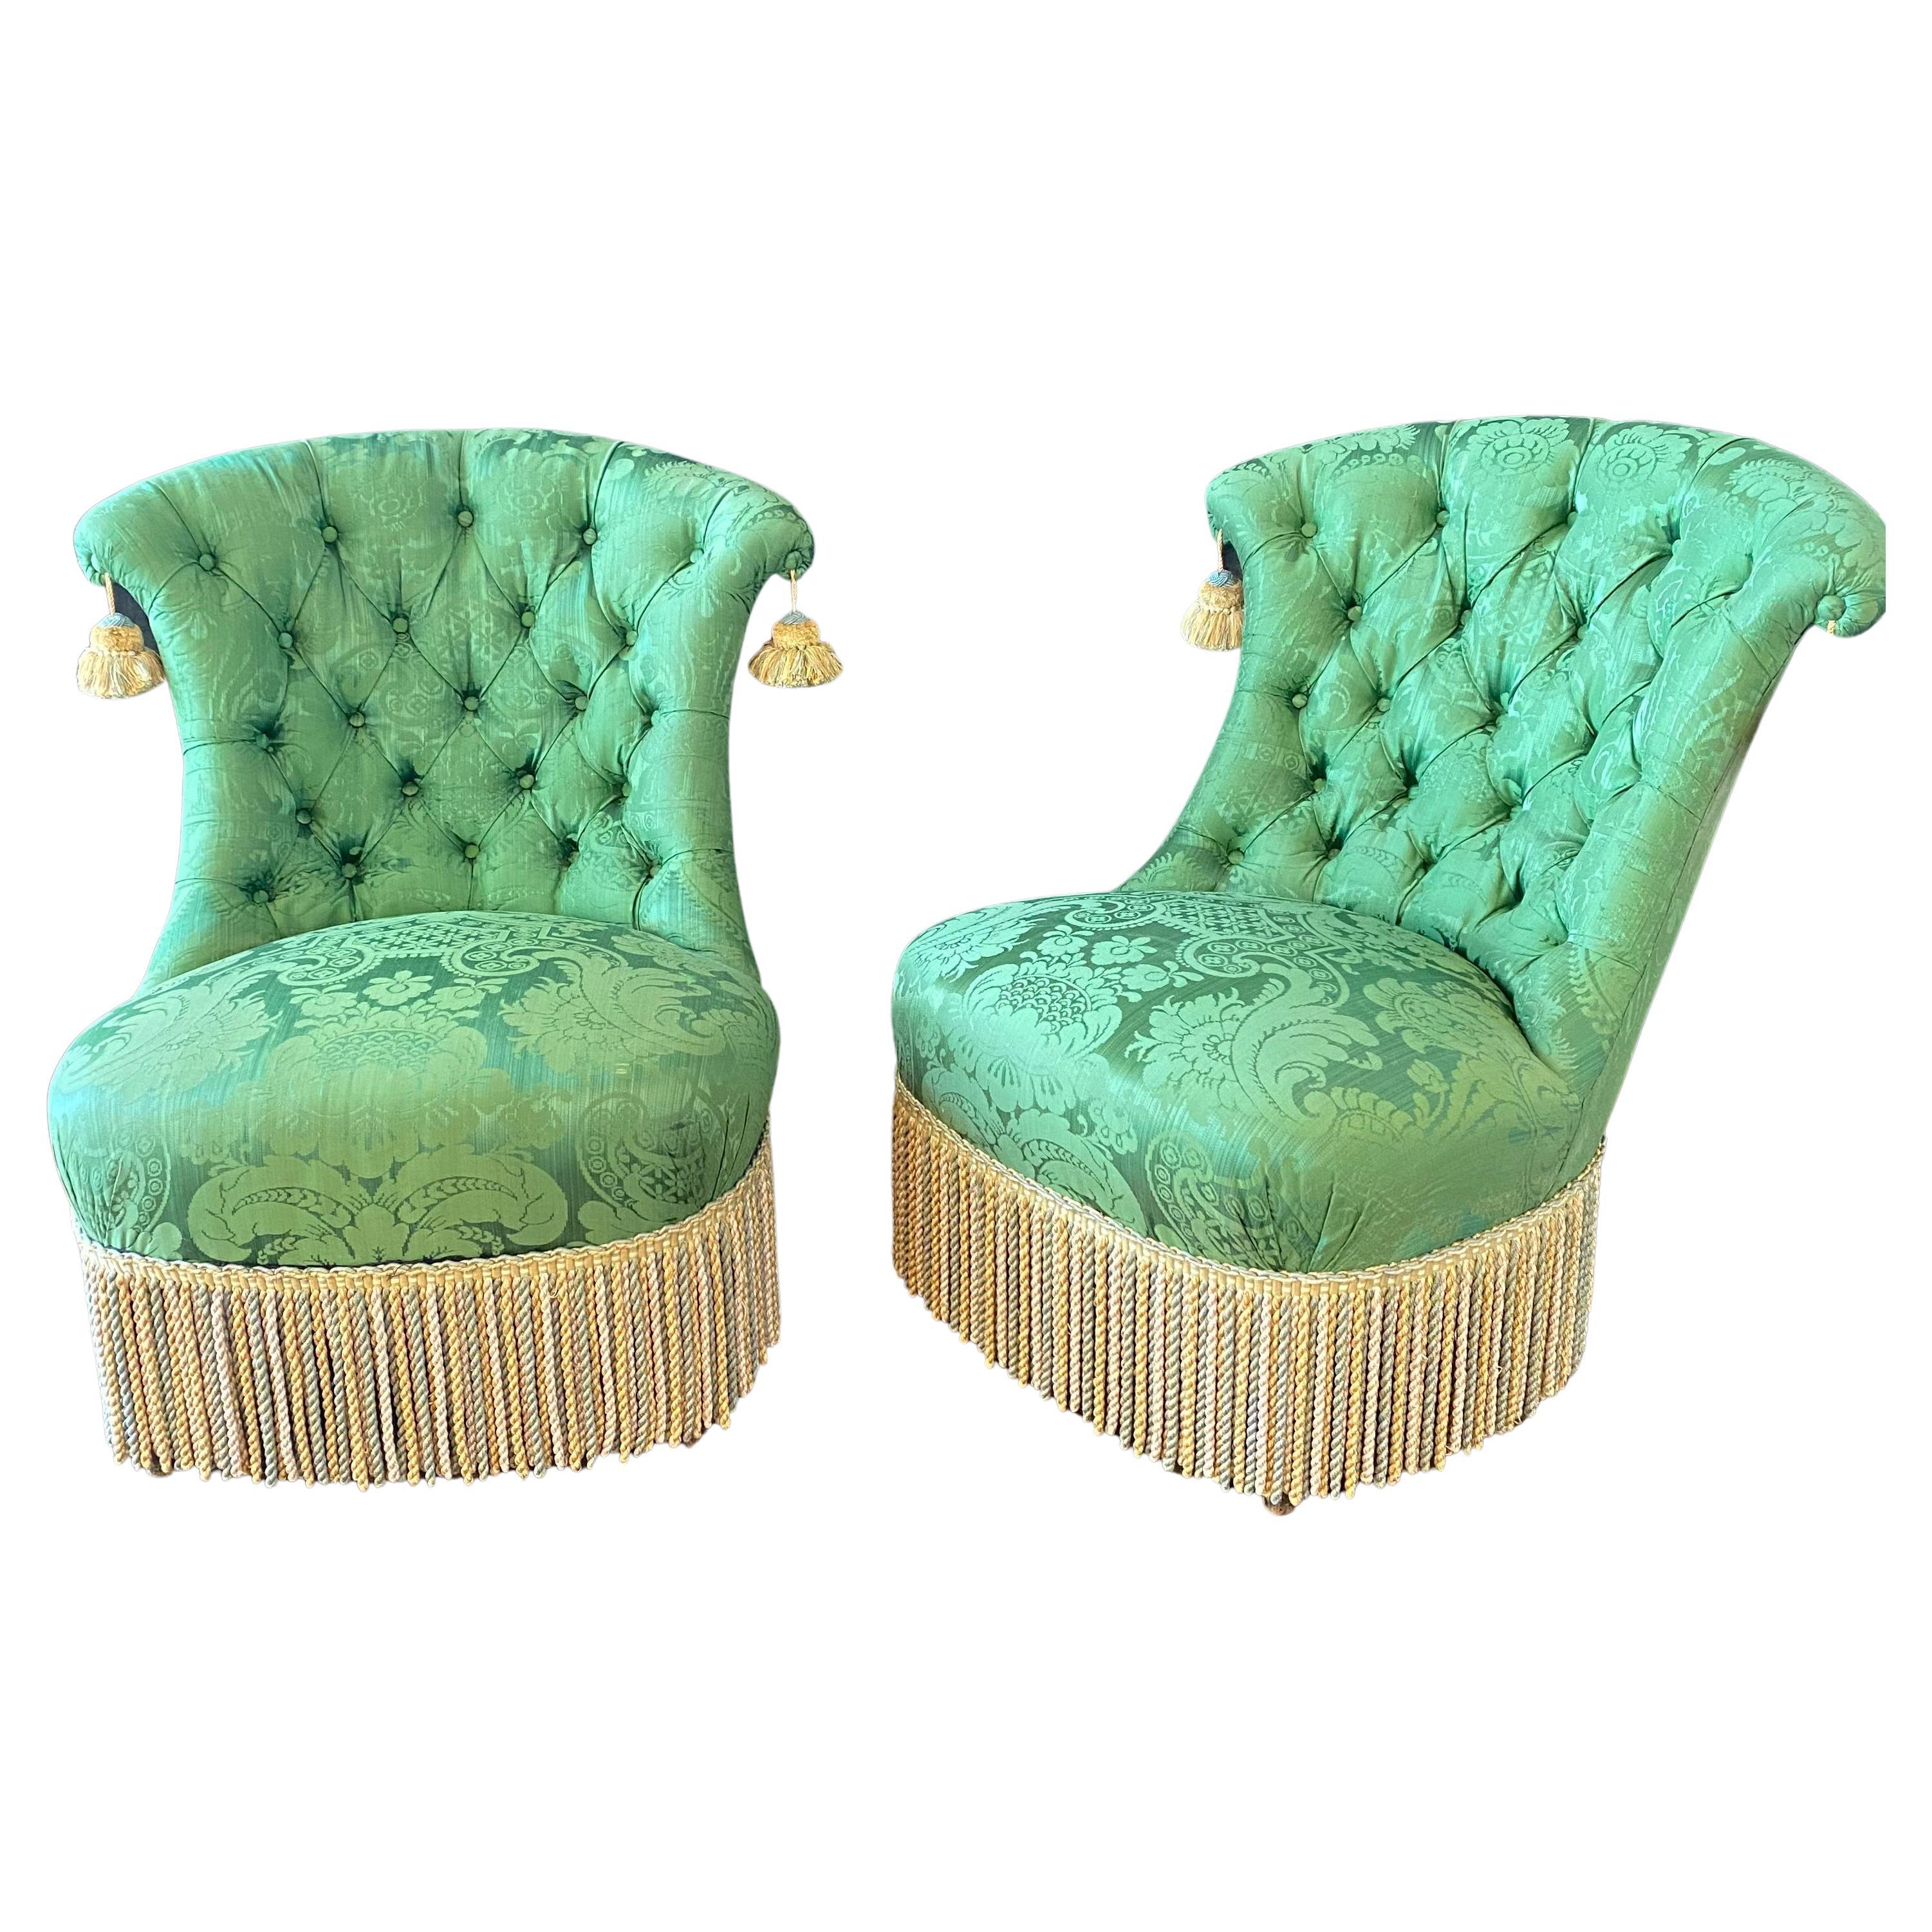 Sumptuous Pair of French Napoleon II Green Silk Tufted Slipper Chairs